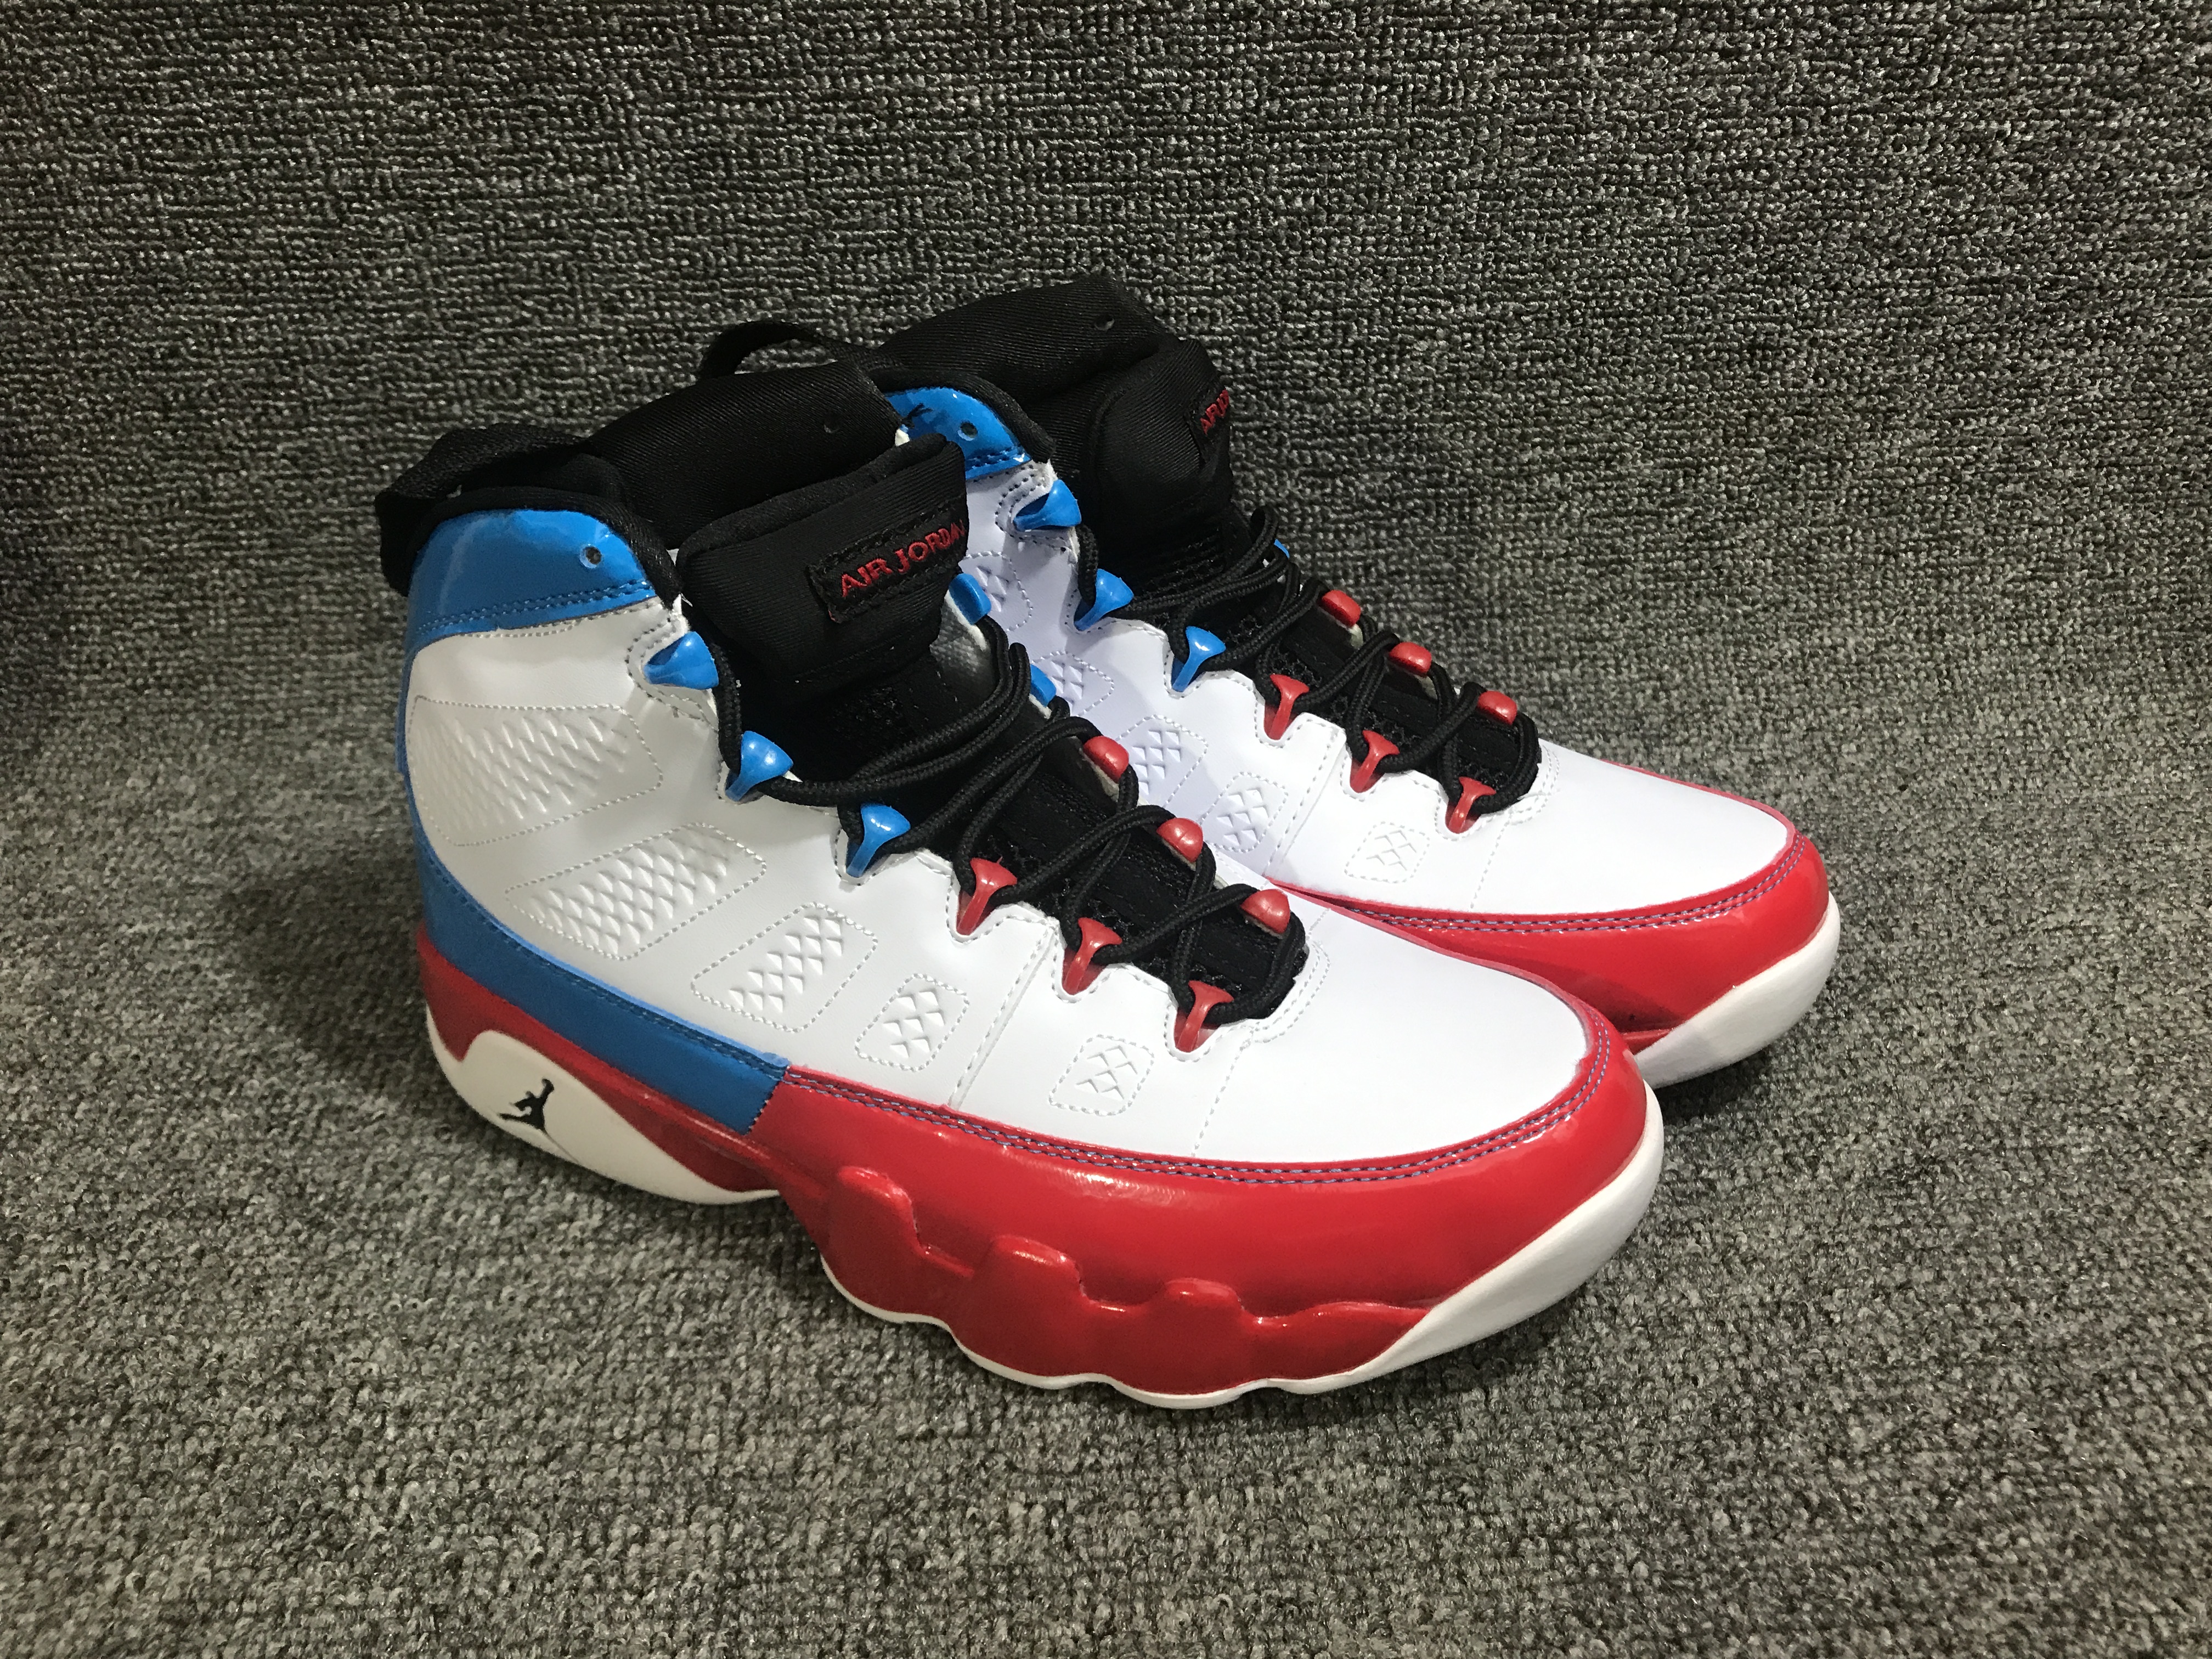 jordan 9 red white and blue